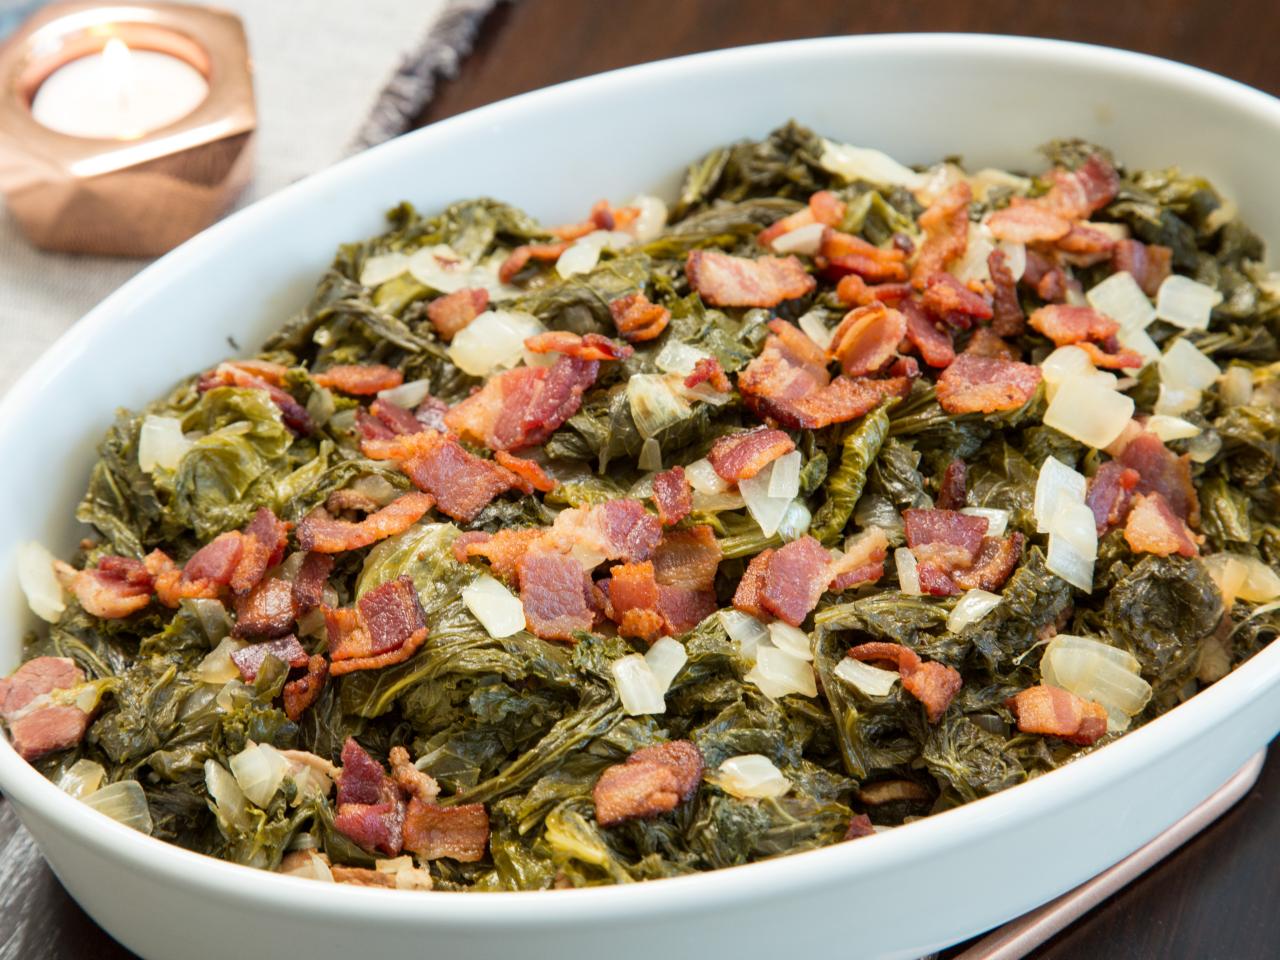 Southern Style Mustard Greens with Crispy Bacon - Tastes Just Like A Memory